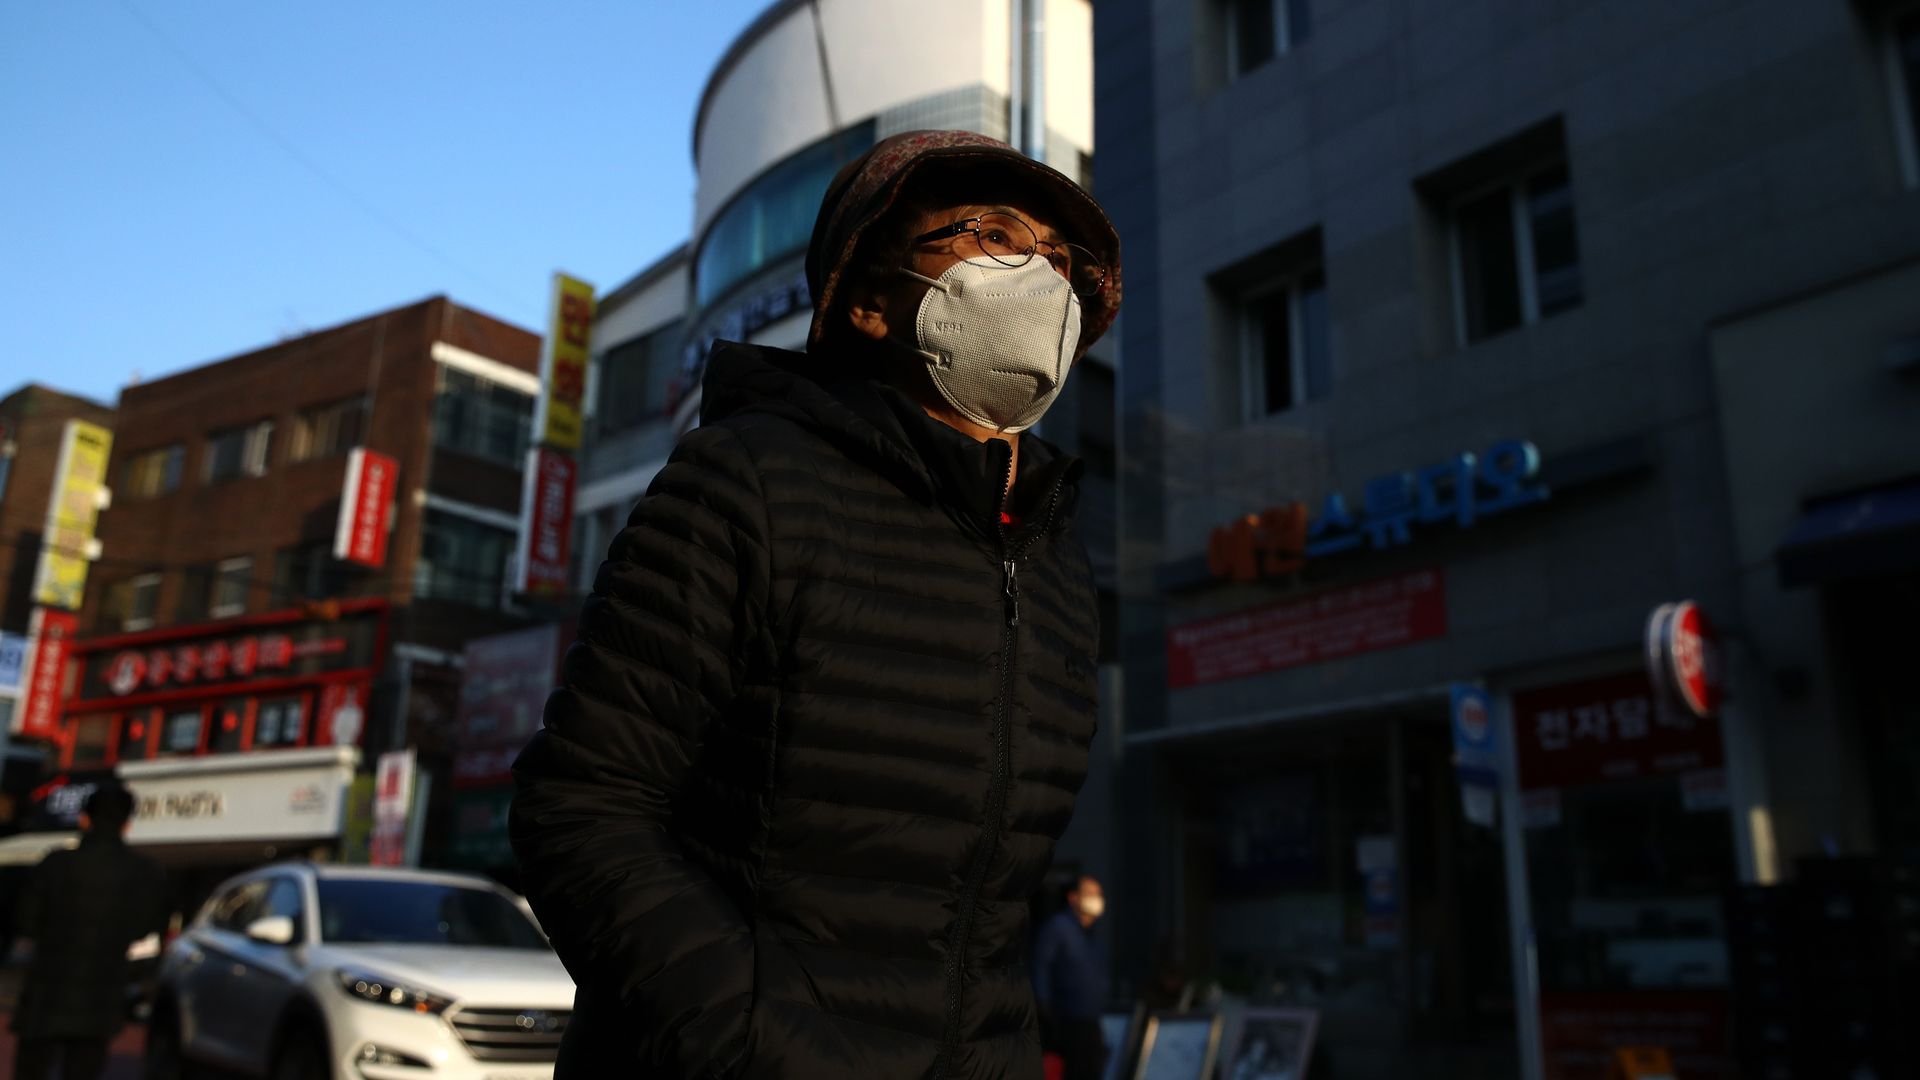 Picture of a woman in South Korea wearing a mask